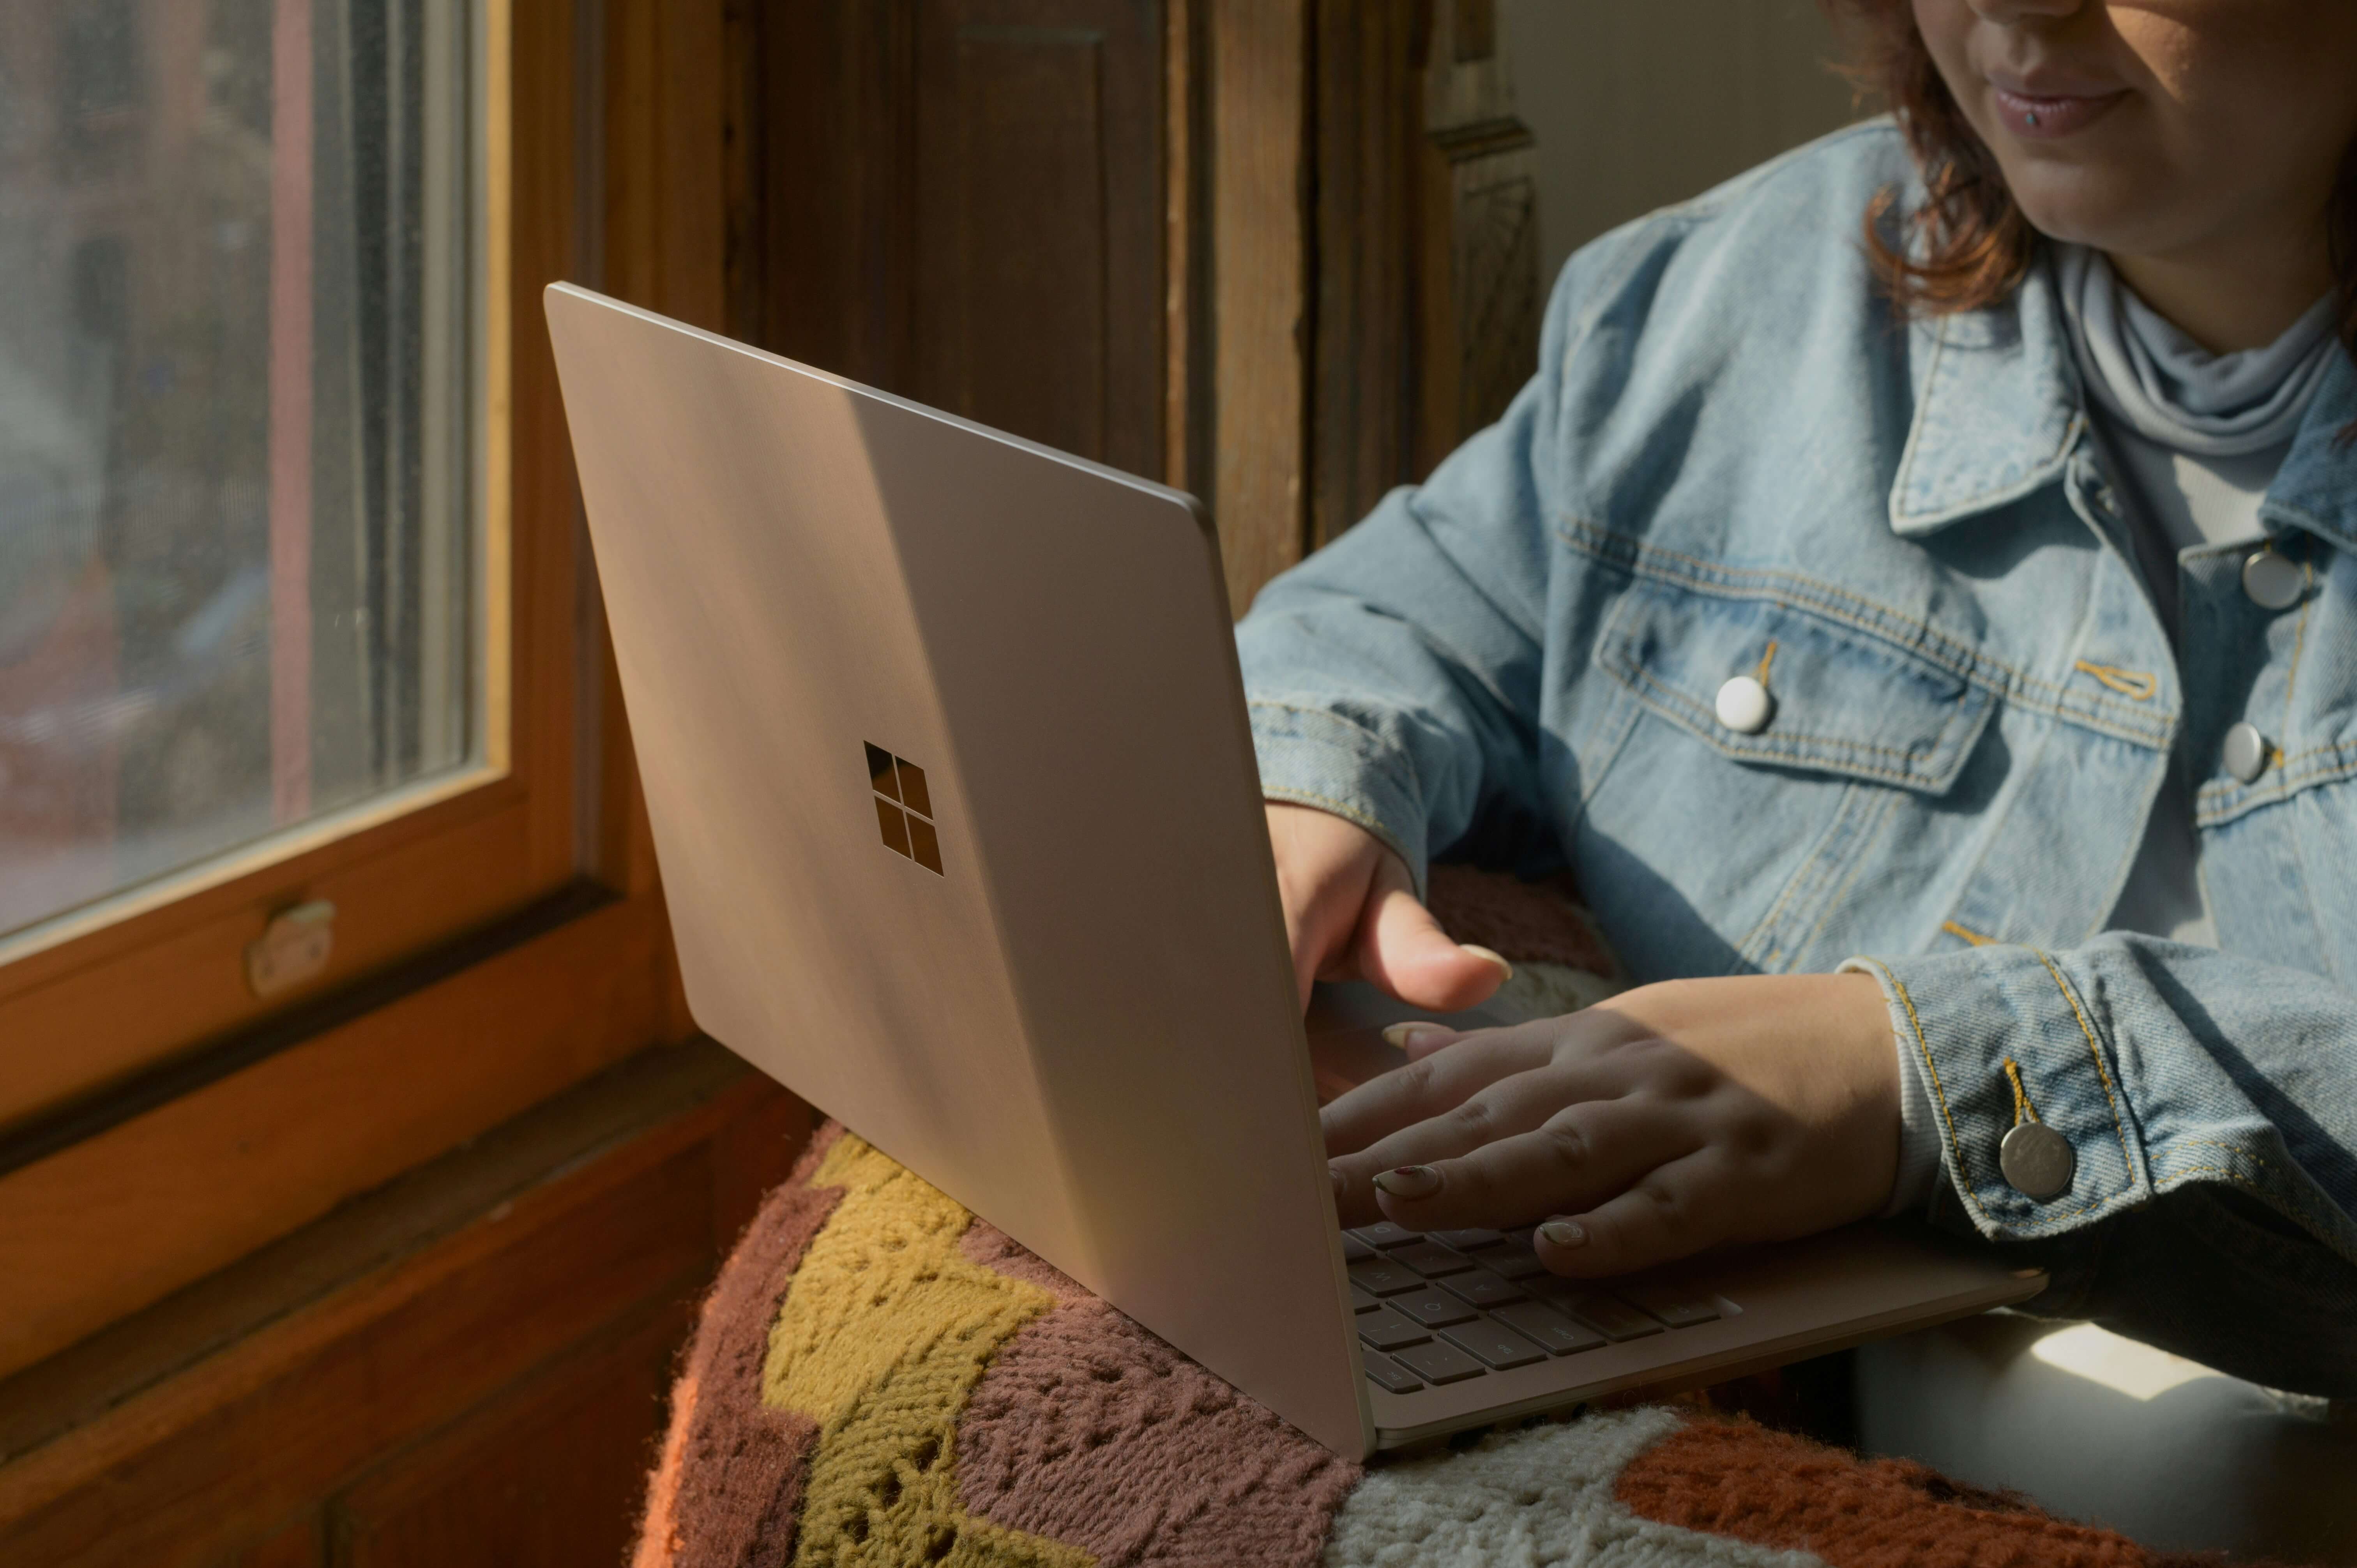 A woman wearing a jean jacket typing on a laptop while sitting near a window. A women's therapist in NYC, NY can help support you. Start your healing journey today!